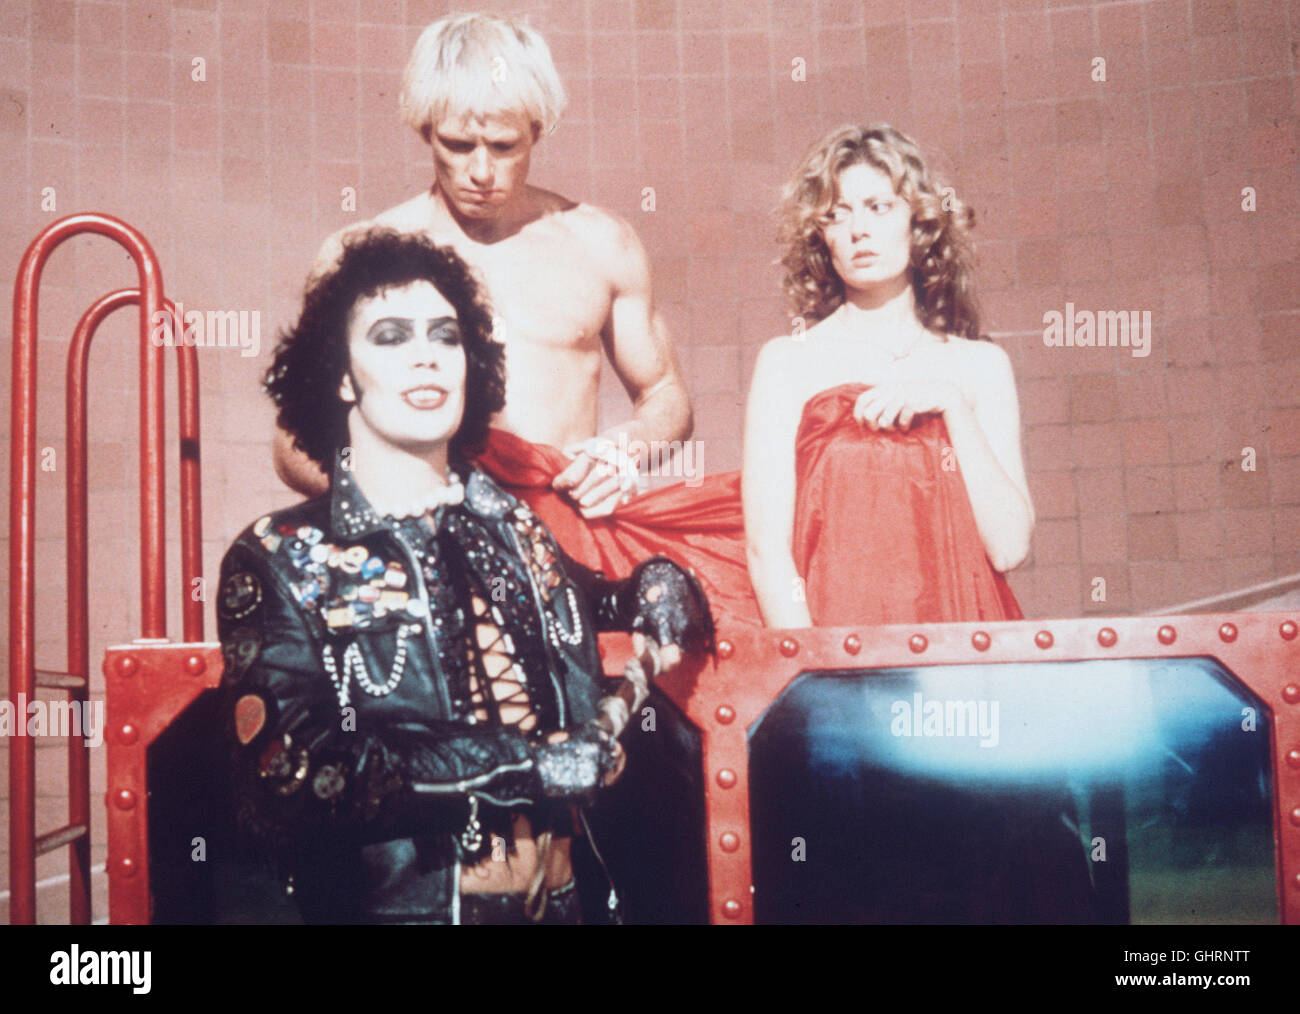 DIE ROCKY HORROR PICTURE SHOW TIM CURRY (Dr. Frank N. Furter), PETER HINWOOD (Rocky Horror), SUSAN SARANDON (Janet Weiss) Regie: Jim Sharman aka. The Rocky Horror Picture Show Stock Photo